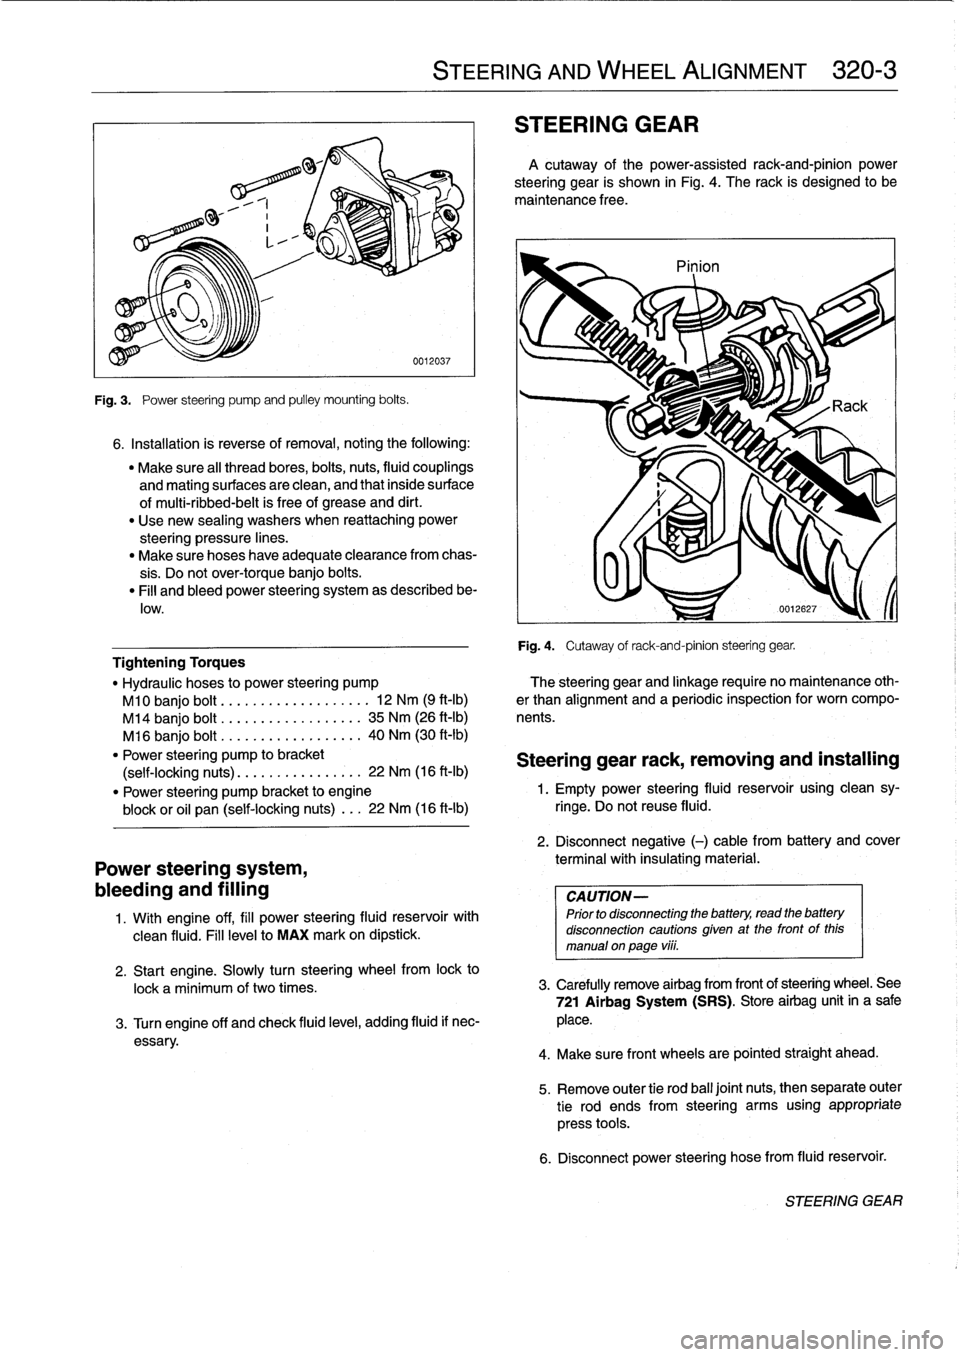 BMW 318i 1997 E36 User Guide 
Fig
.
3
.

	

Power
steering
pump
and
pulley
mounting
bolts
.

6
.
Installation
is
reverse
of
removal,
noting
the
following
:

"
Make
sure
al¡
thread
bores,
bolts,
nuts,
fluid
couplings

and
mating
